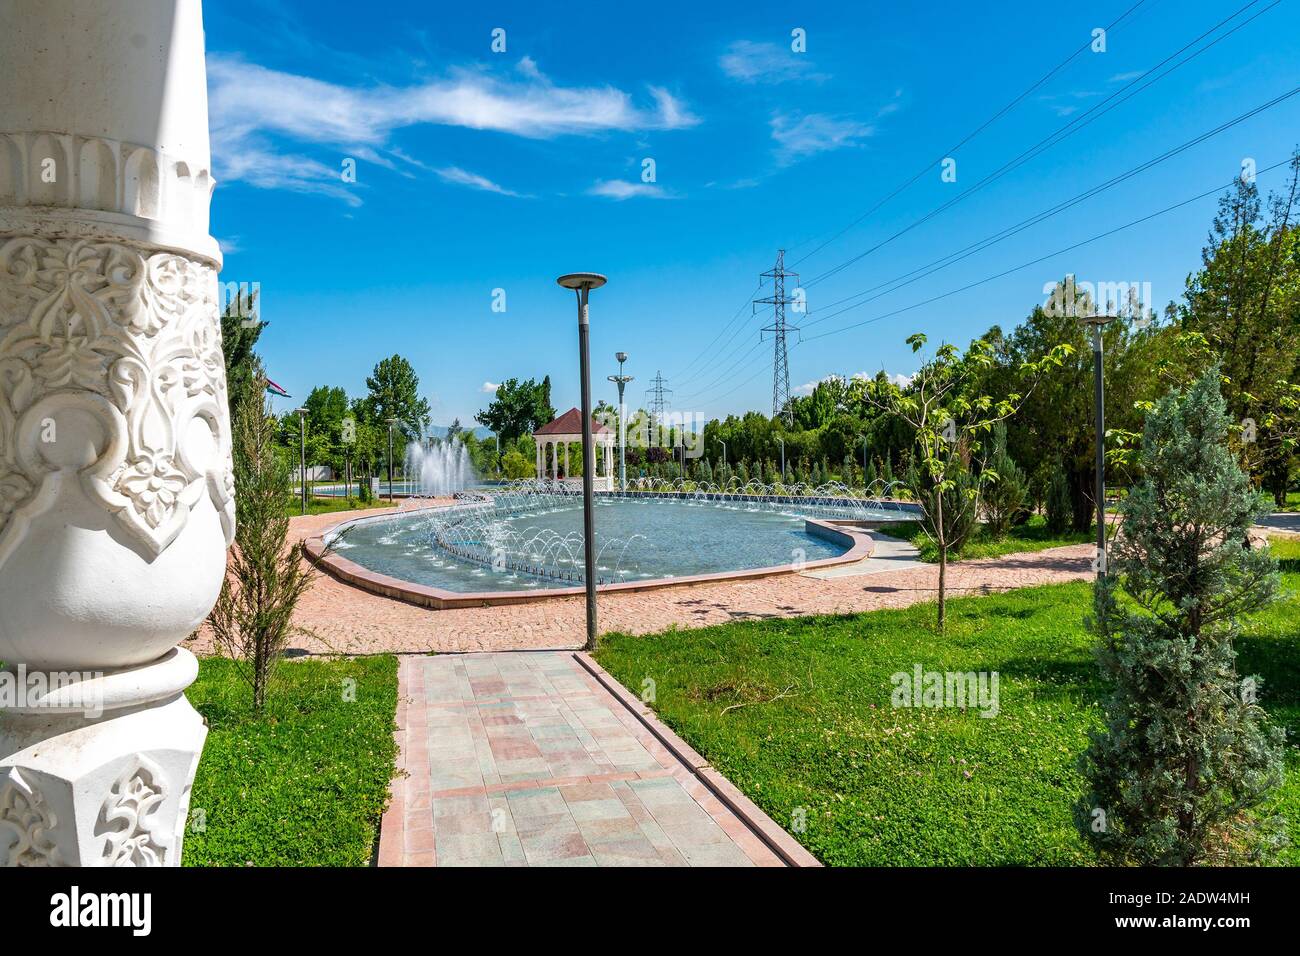 Dushanbe Youth Park Leading Lines View of Pavilion with Tajikistan Ornaments Decorated Columns and Fountain on a Sunny Blue Sky Day Stock Photo